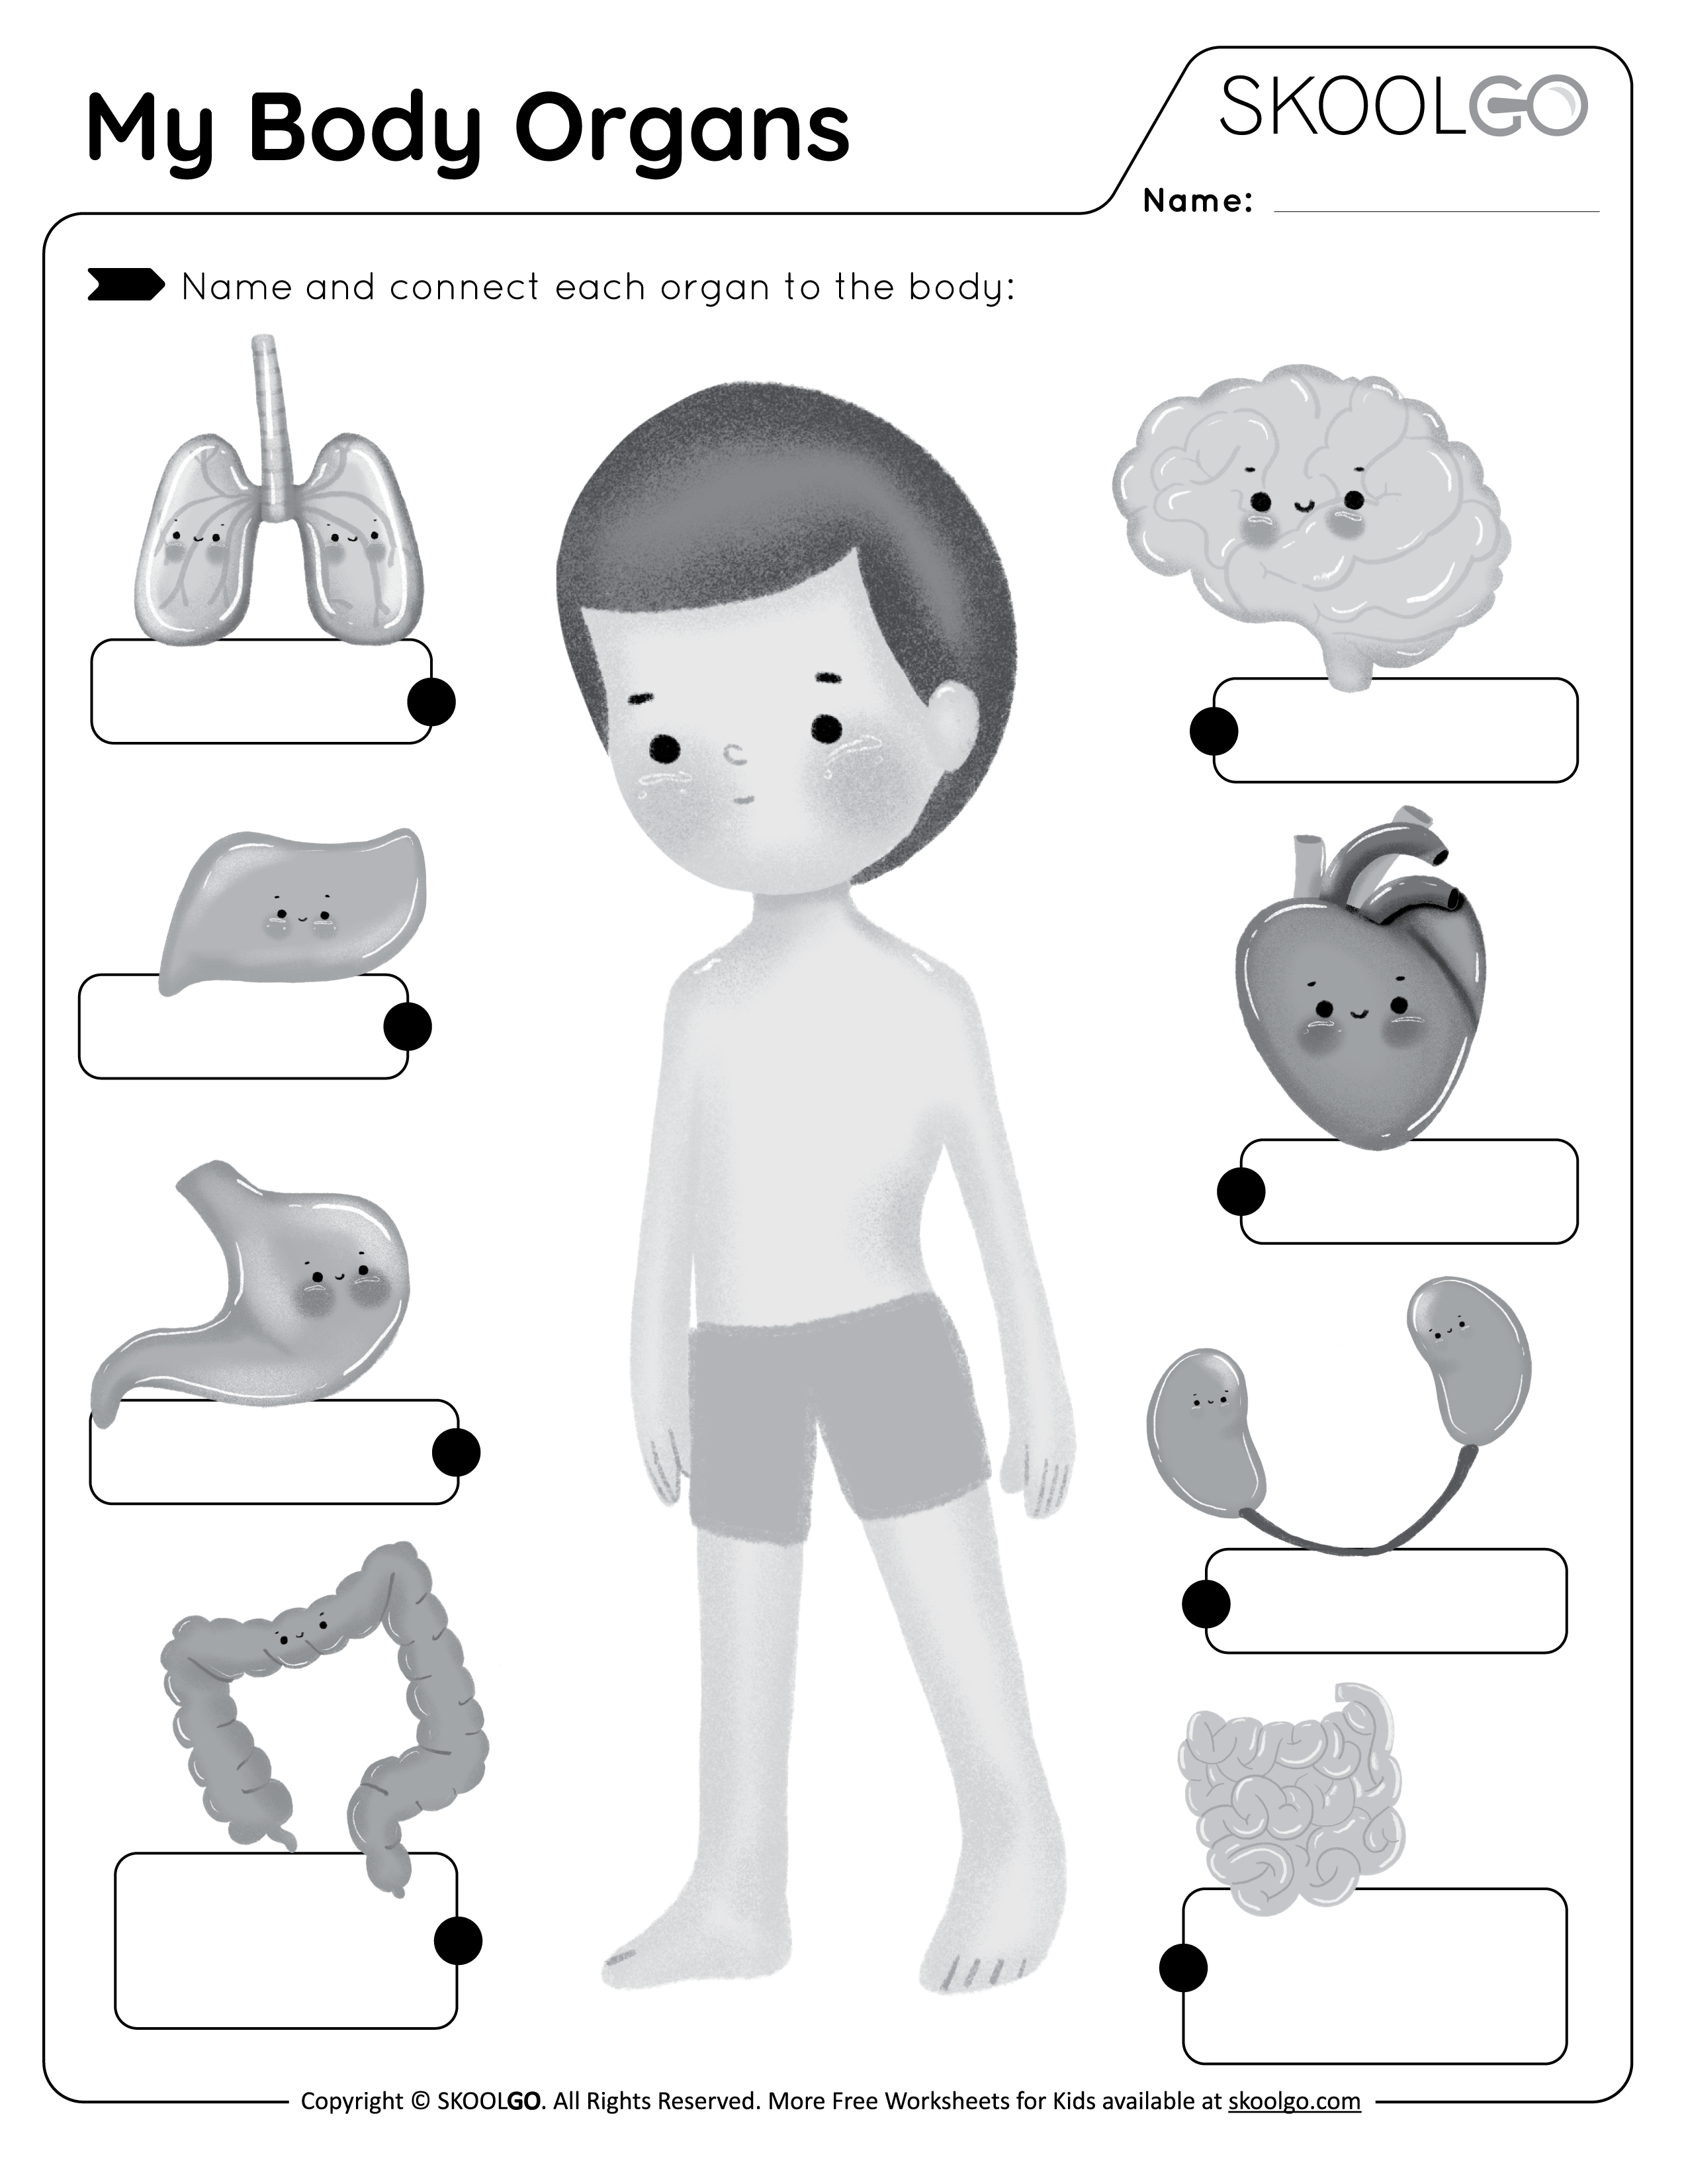 My Body Organs - Free Worksheet for Kids - Activity